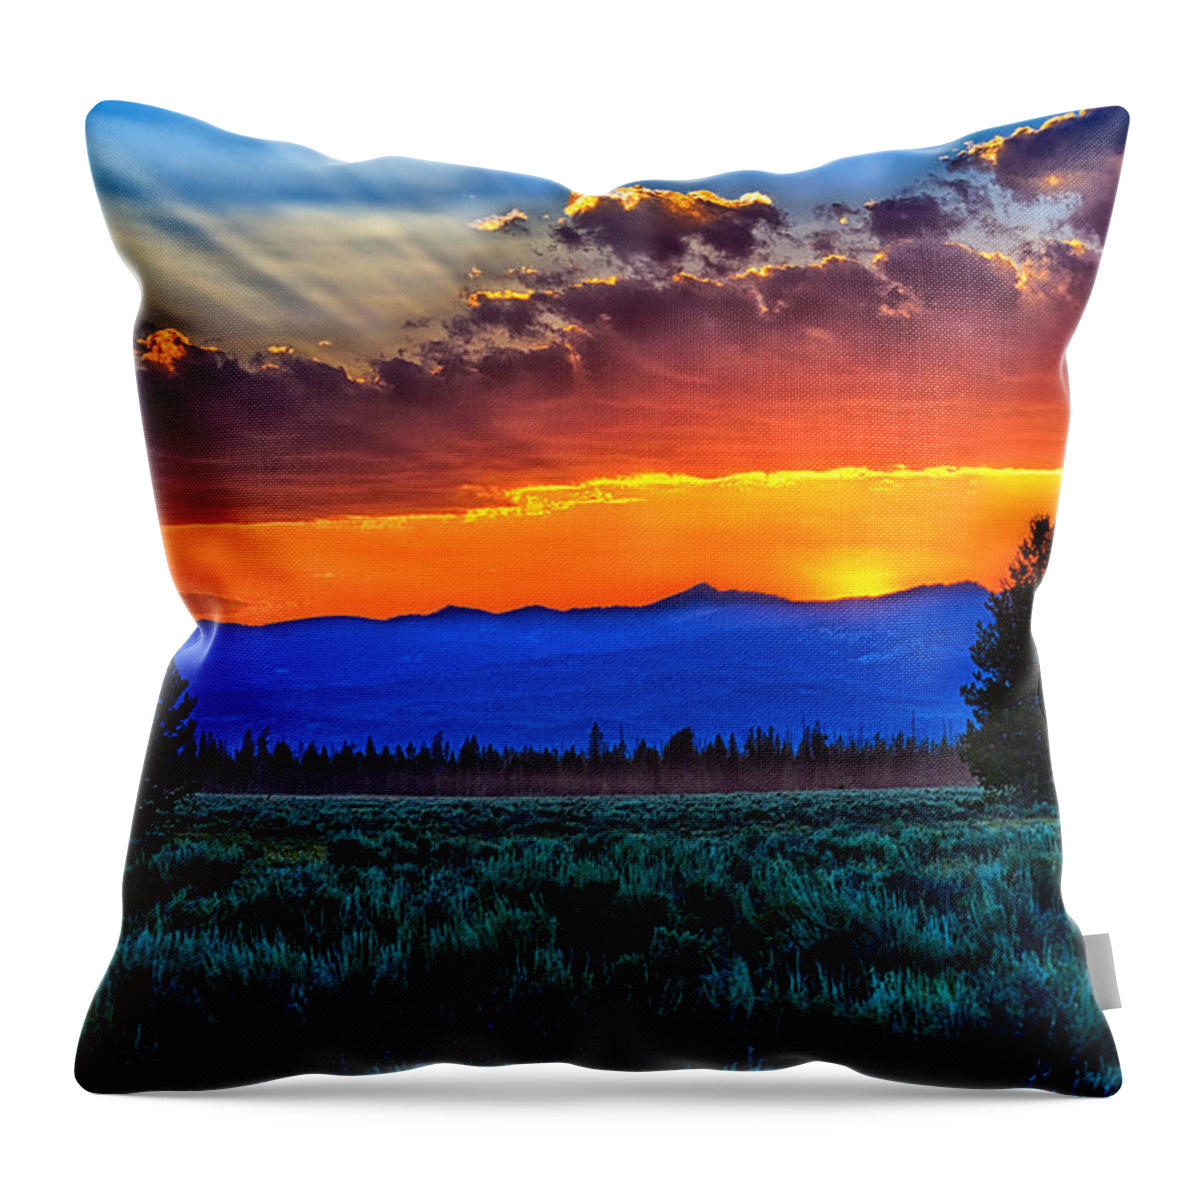 Island Park Throw Pillow featuring the photograph Island Park Sunset by Greg Norrell